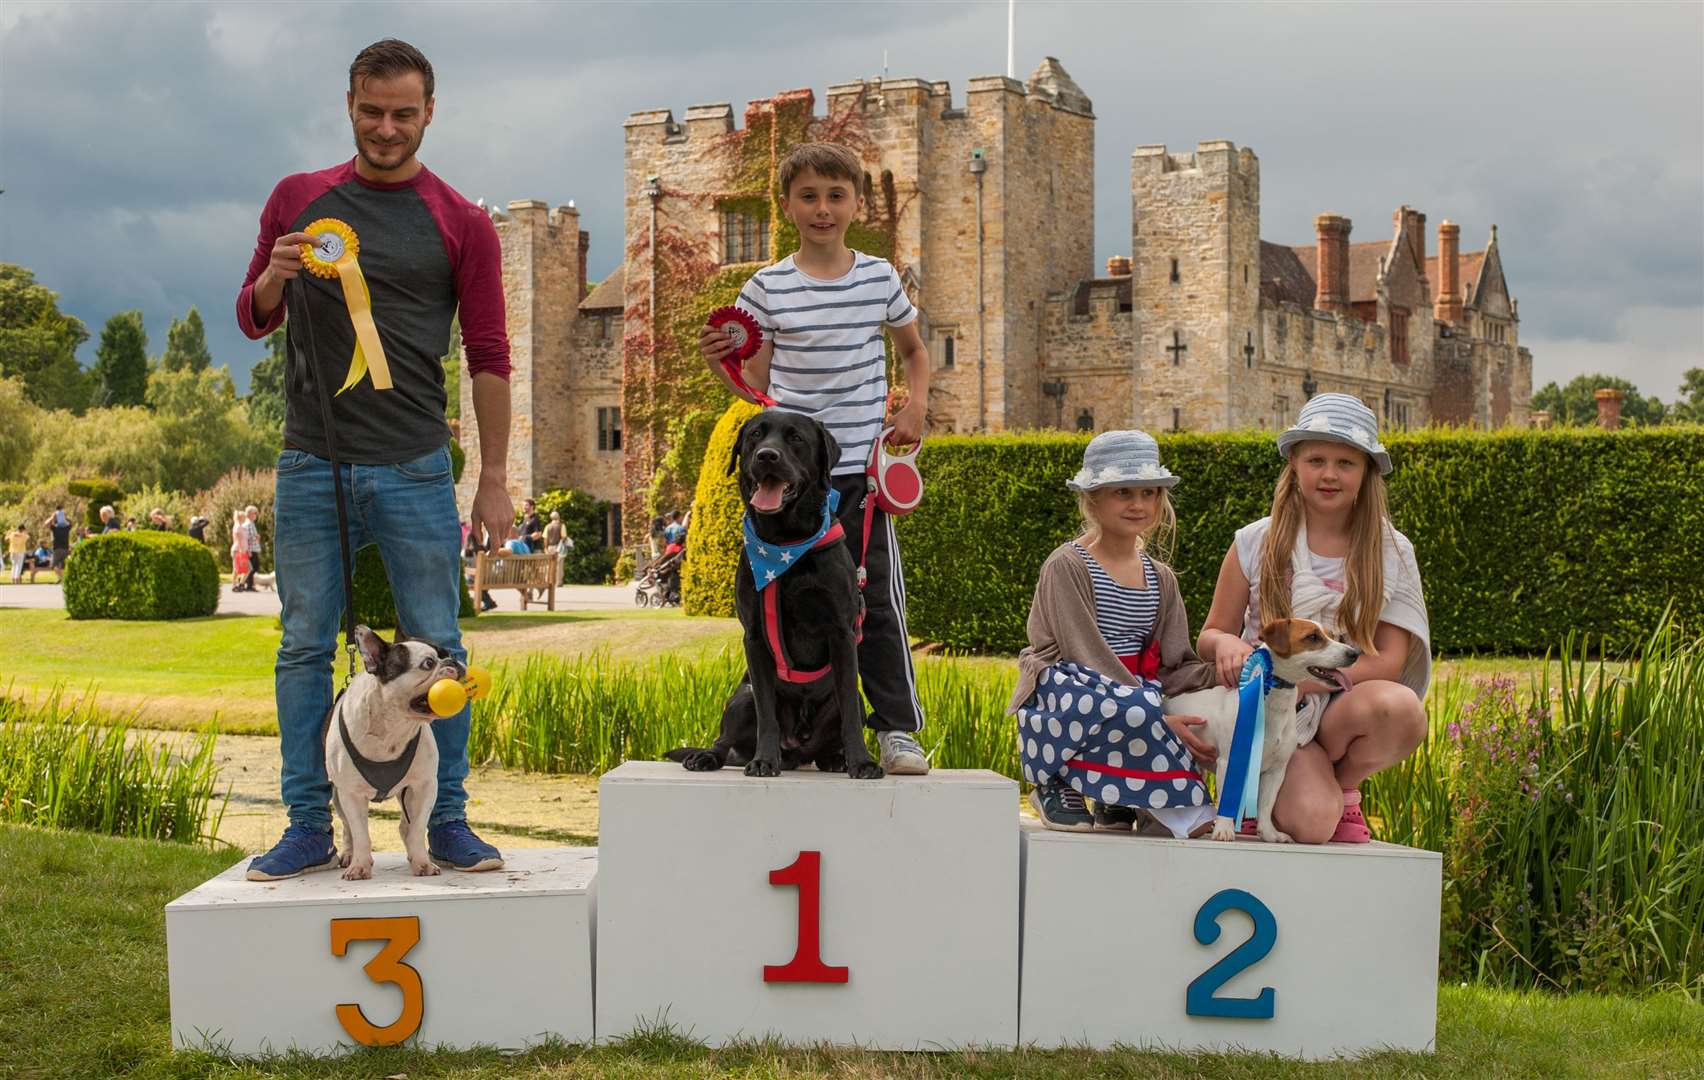 Your dog could win prizes at Castle Canines Picture: Alison Bailey